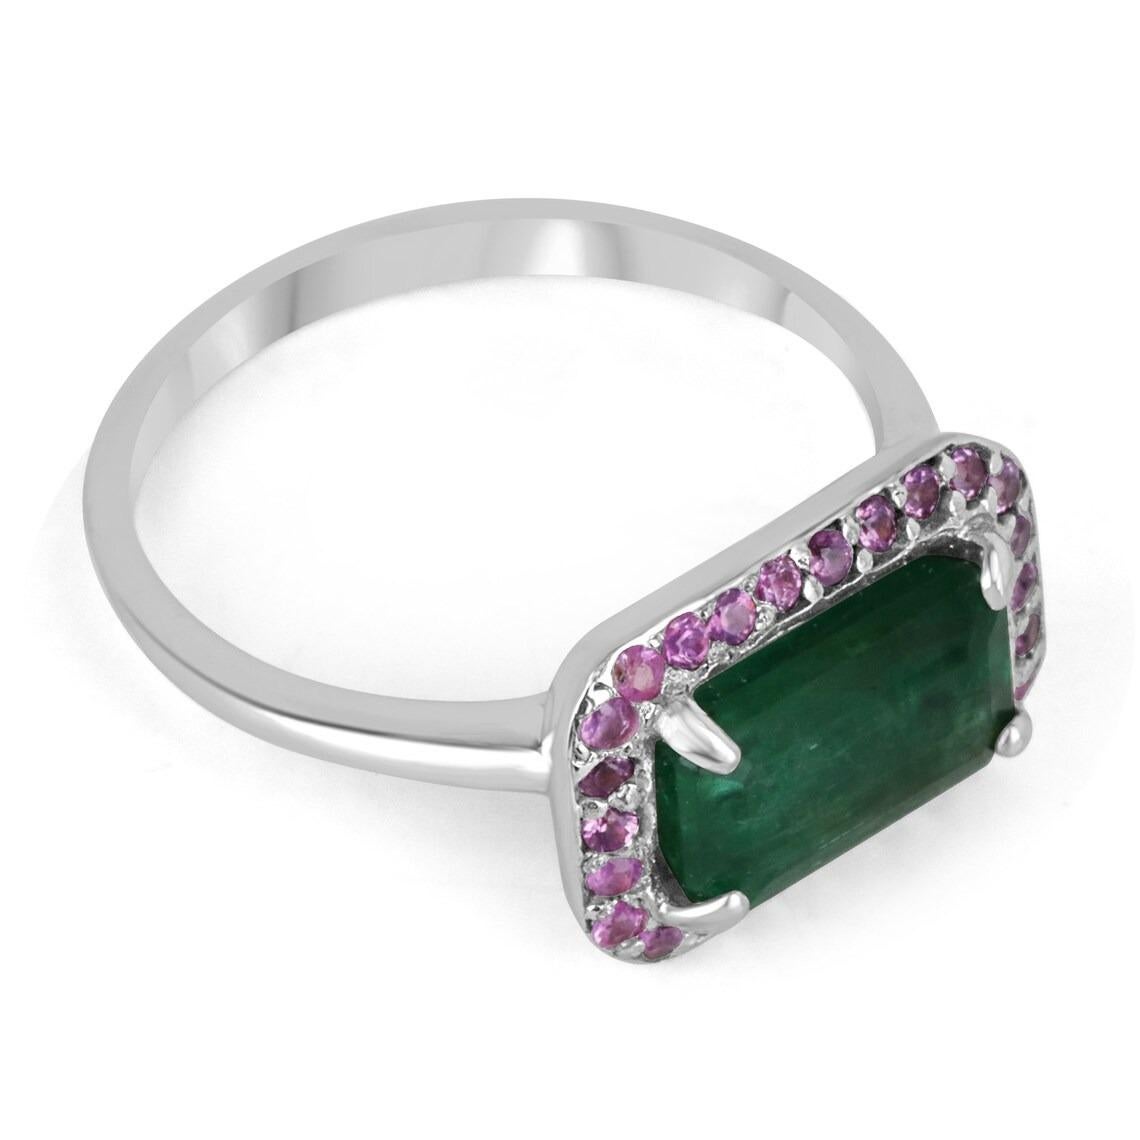 A stunning East to West emerald & pink sapphire 14K white gold ring. The center stone features a beautiful 1.90-carat, natural emerald cut. The gemstone has a desirable dark green color, with good eye clarity. Set east to west; surrounded by a round